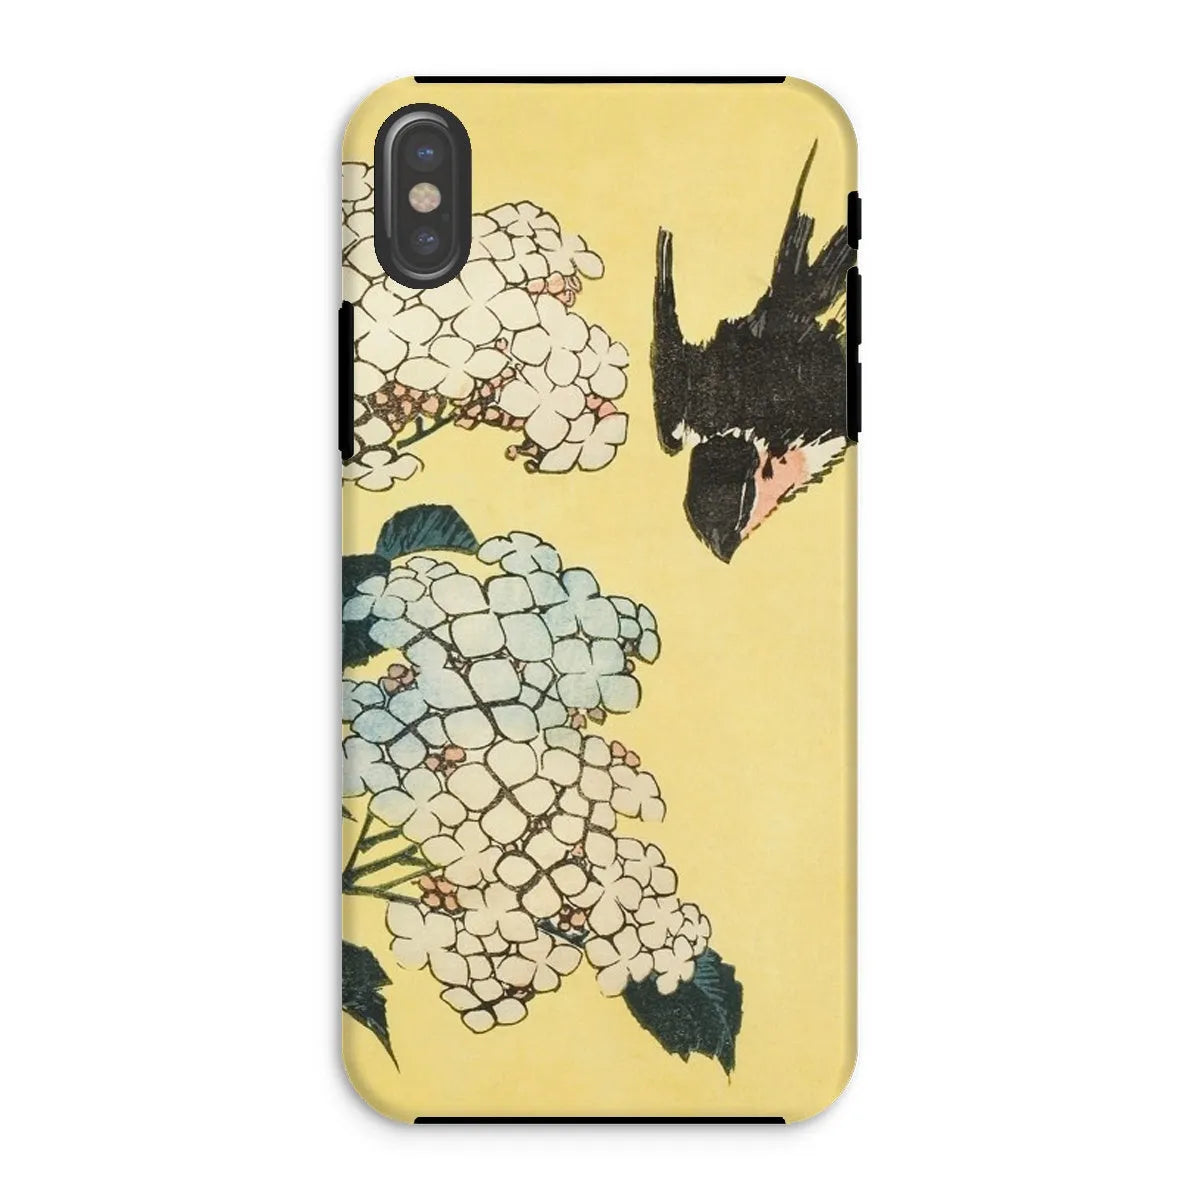 Hydrangea And Swallow - Japanese Art Phone Case - Hokusai - Iphone Xs / Matte - Mobile Phone Cases - Aesthetic Art